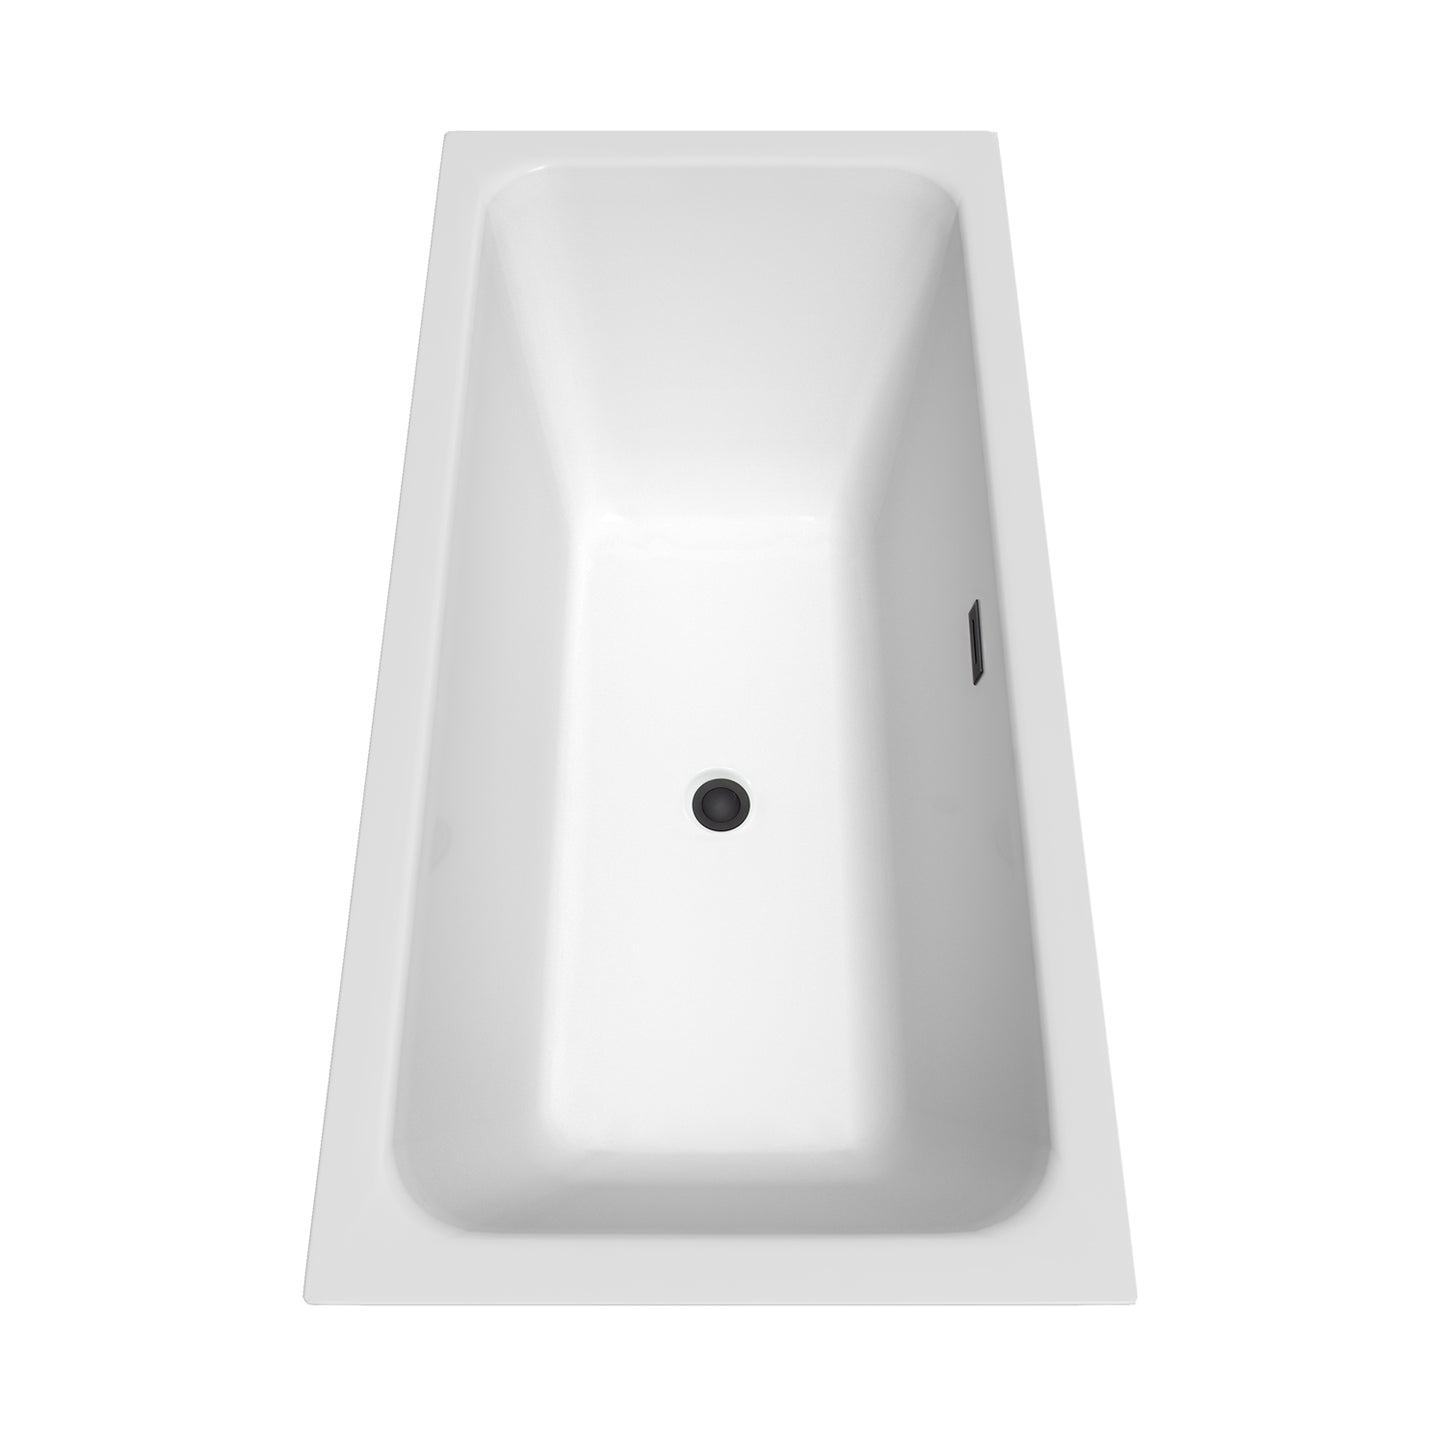 Wyndham Collection Galina 67 Inch Freestanding Bathtub in White with  Drain and Overflow Trim - Luxe Bathroom Vanities